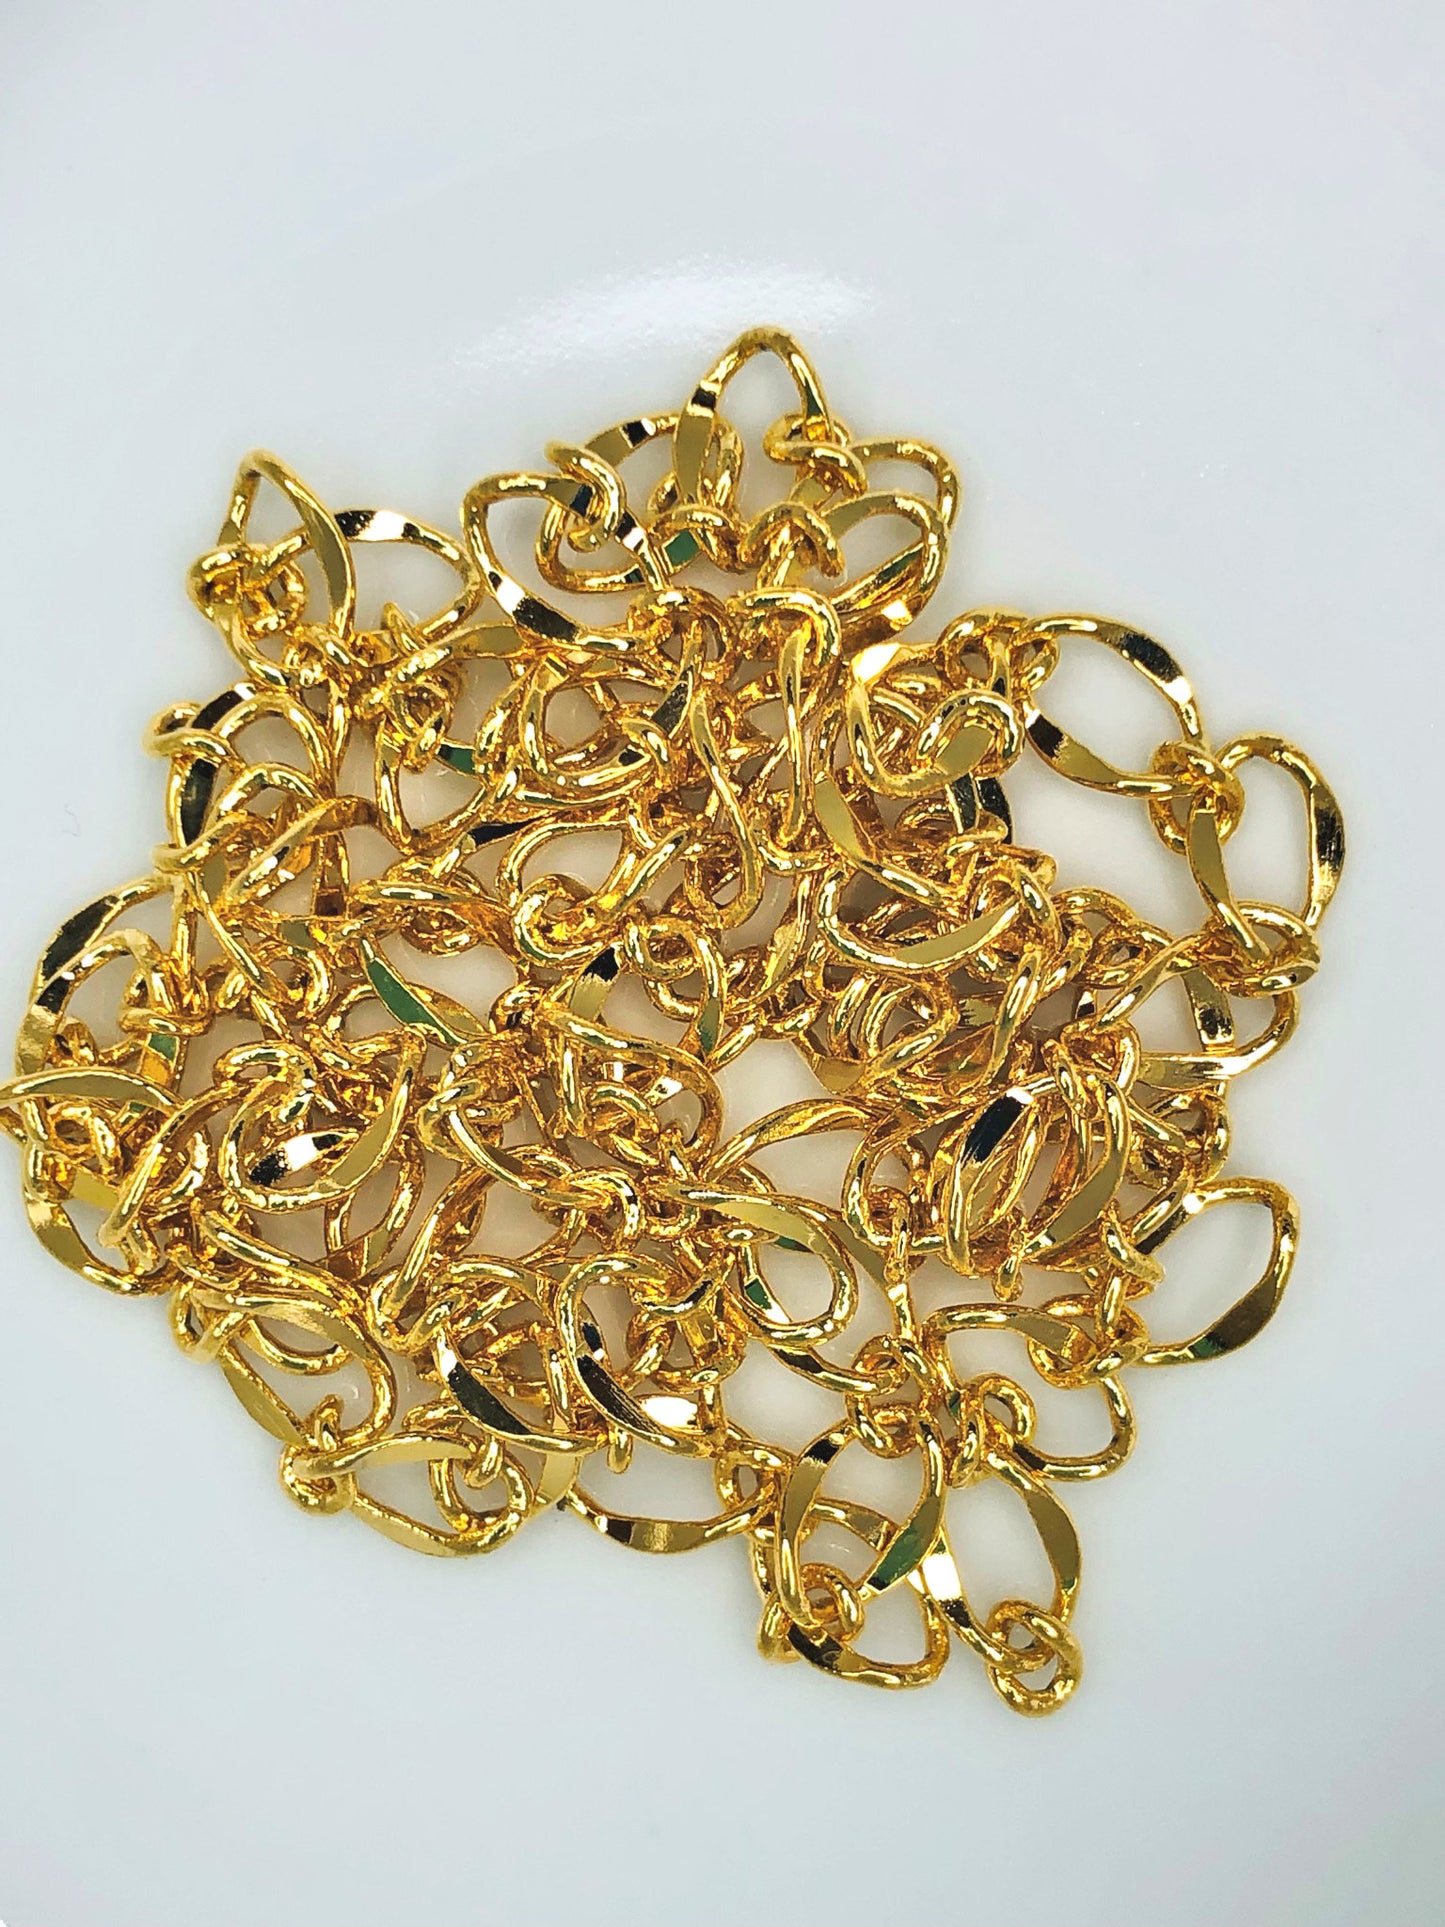 Gold Plated Fancy Curb Chain, 5 x 8 mm - 12 Inches